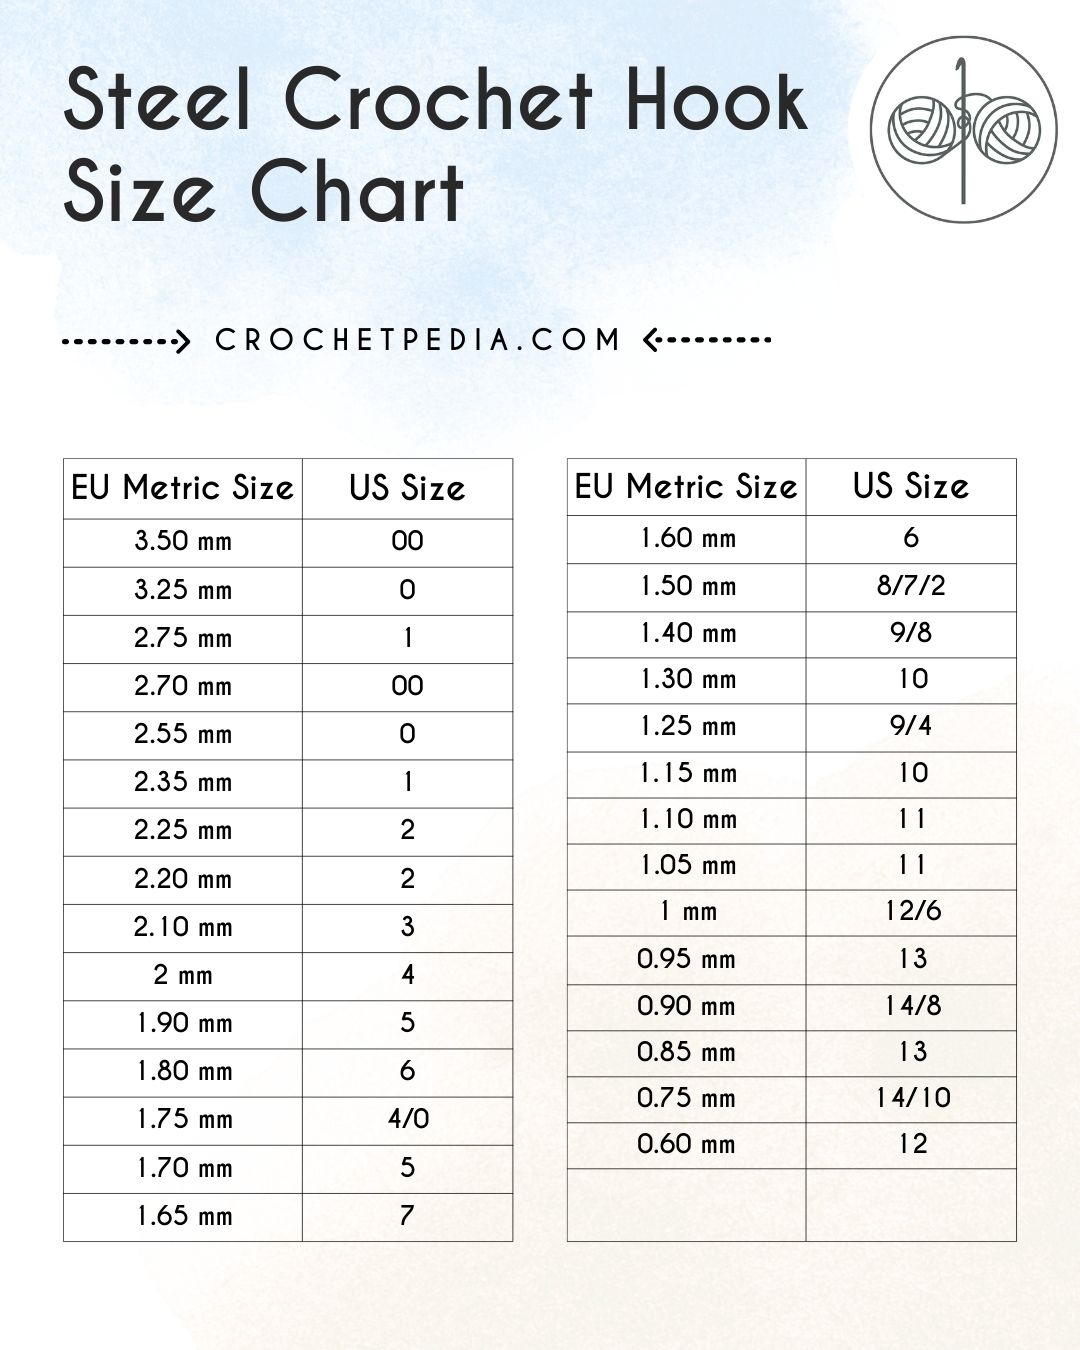 Crochet Hook Sizes Guide - Size Chart, Styles of Hook & More